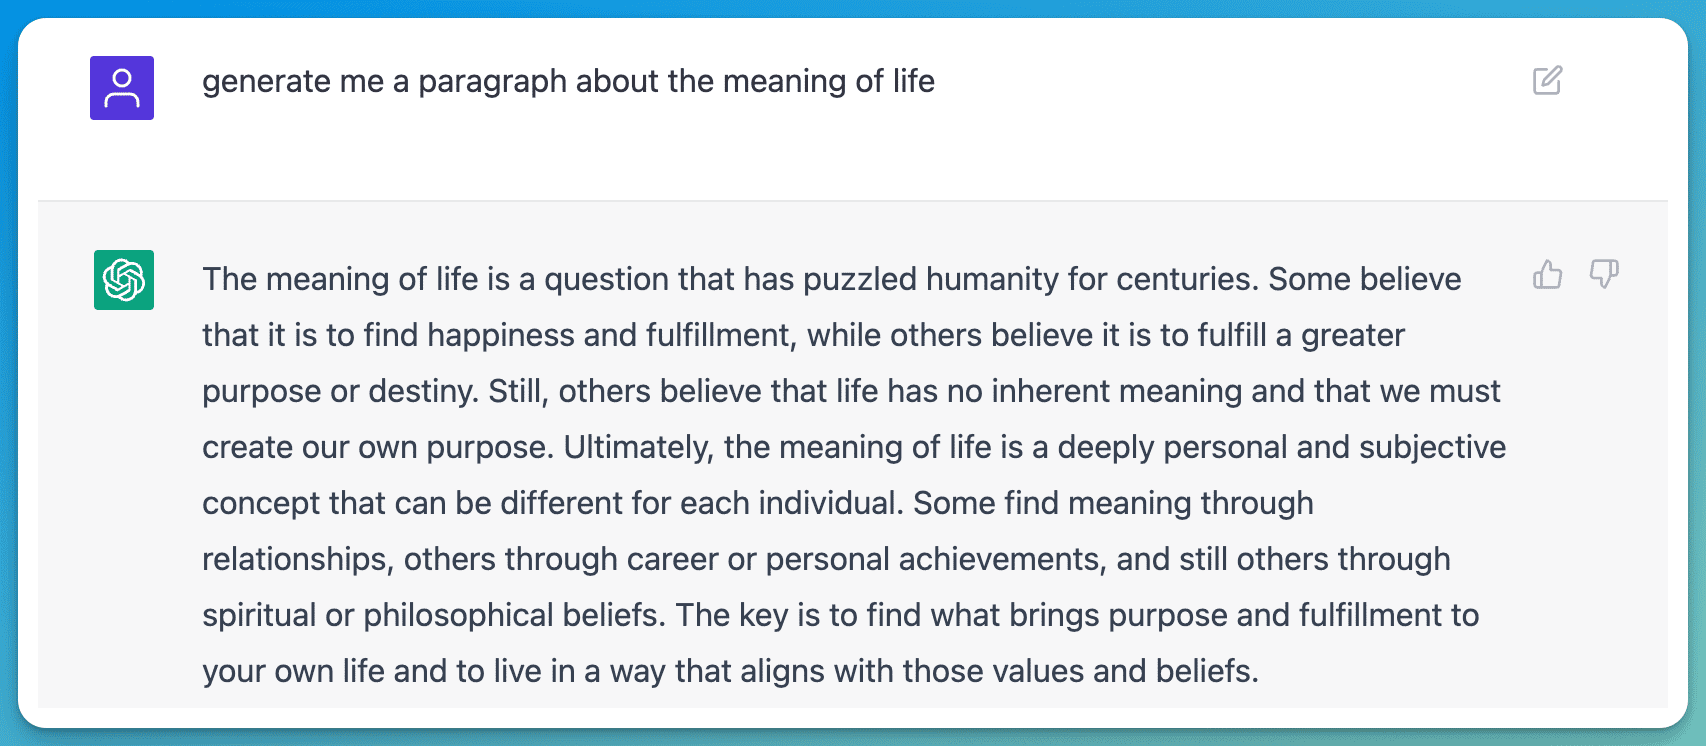 ChatGPT response describing the meaning of life is about personal fulfillment